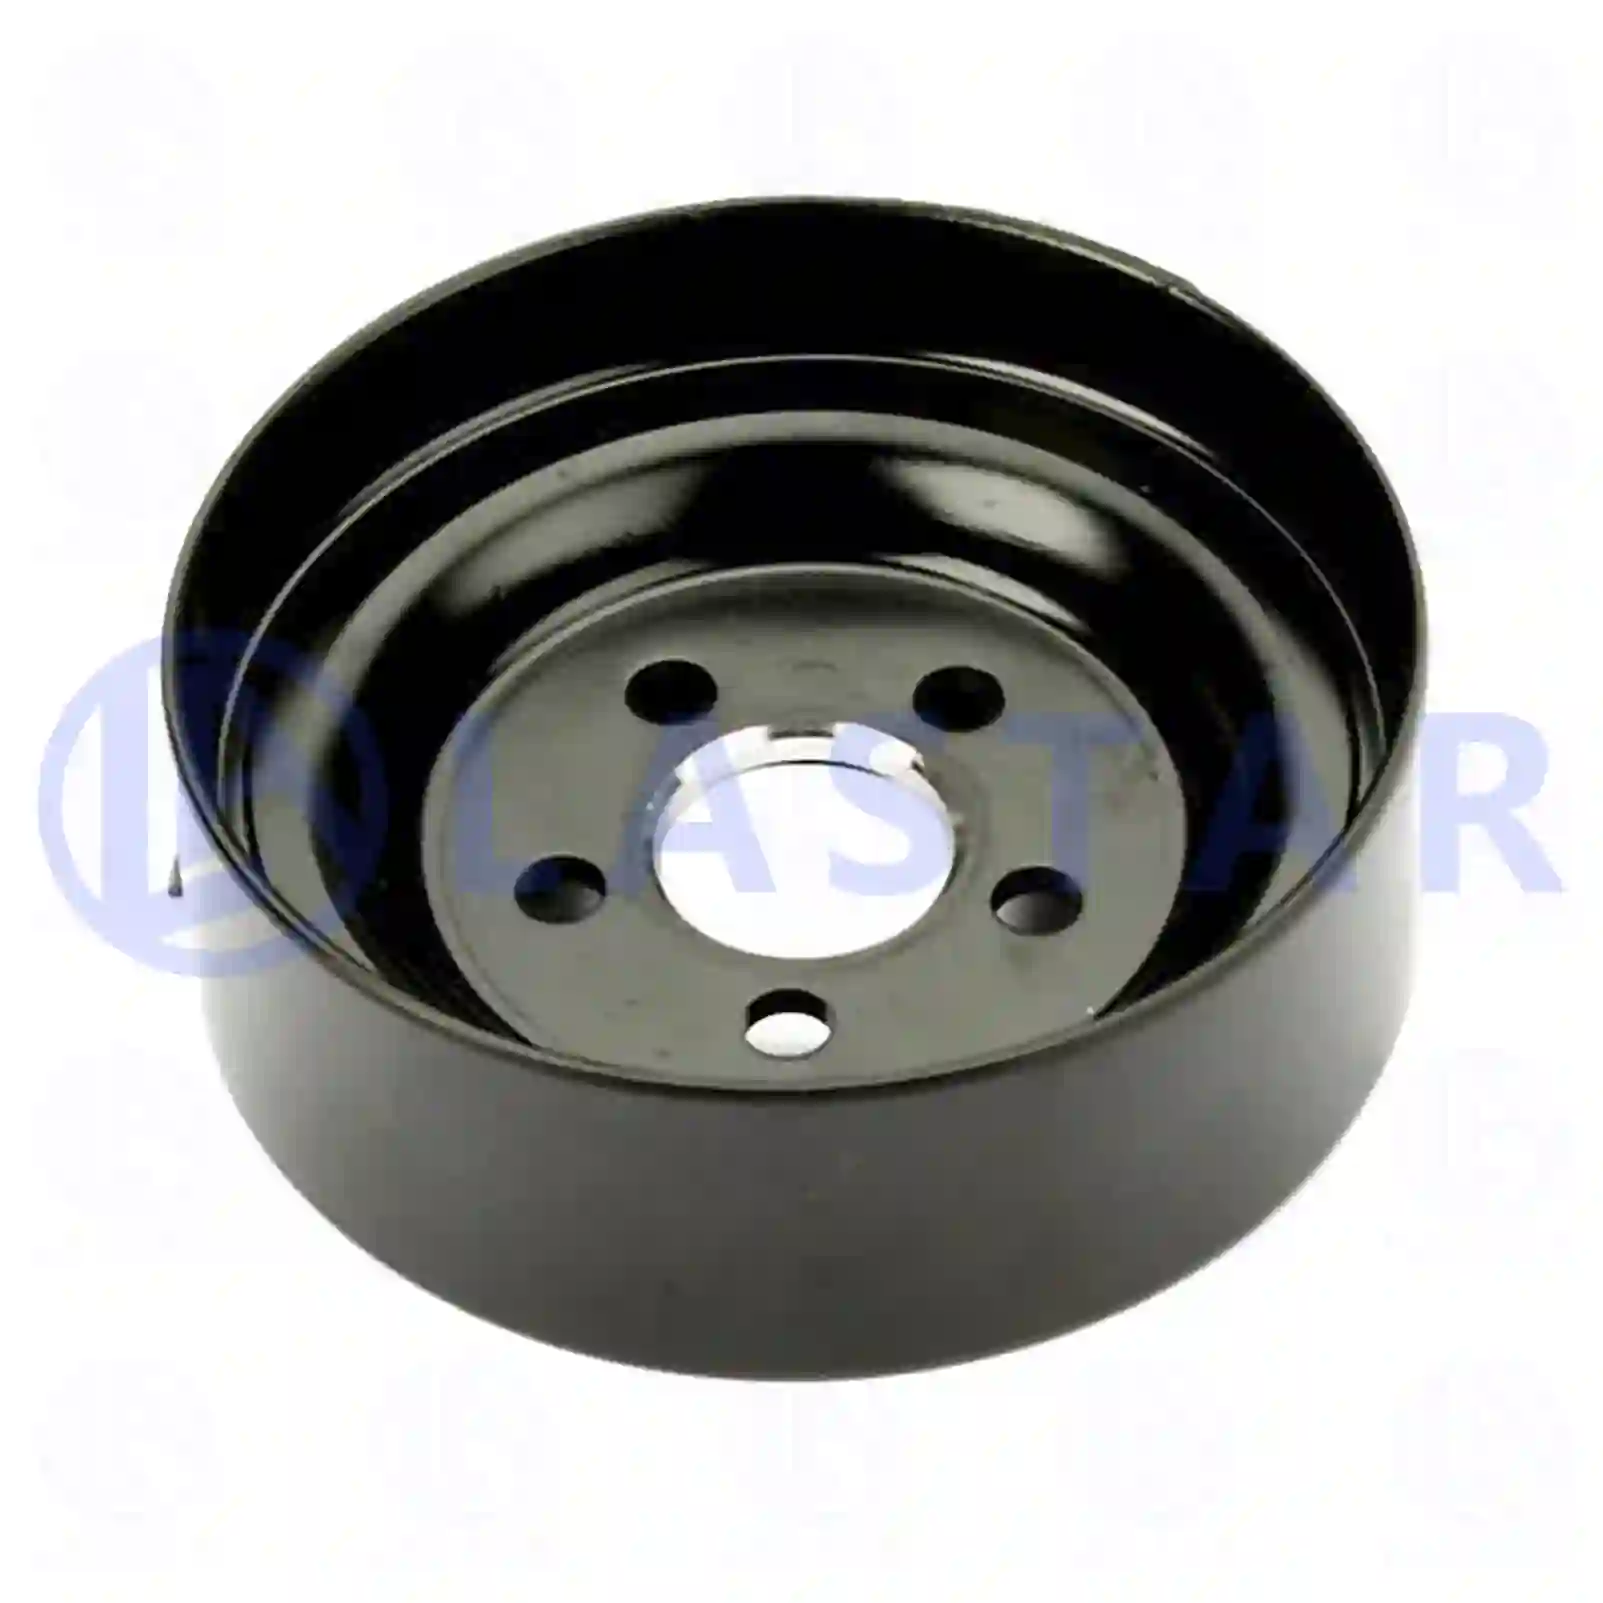 Pulley, for vehicles with retarder, 77708908, 7420524754, 20524754, ZG01929-0008 ||  77708908 Lastar Spare Part | Truck Spare Parts, Auotomotive Spare Parts Pulley, for vehicles with retarder, 77708908, 7420524754, 20524754, ZG01929-0008 ||  77708908 Lastar Spare Part | Truck Spare Parts, Auotomotive Spare Parts